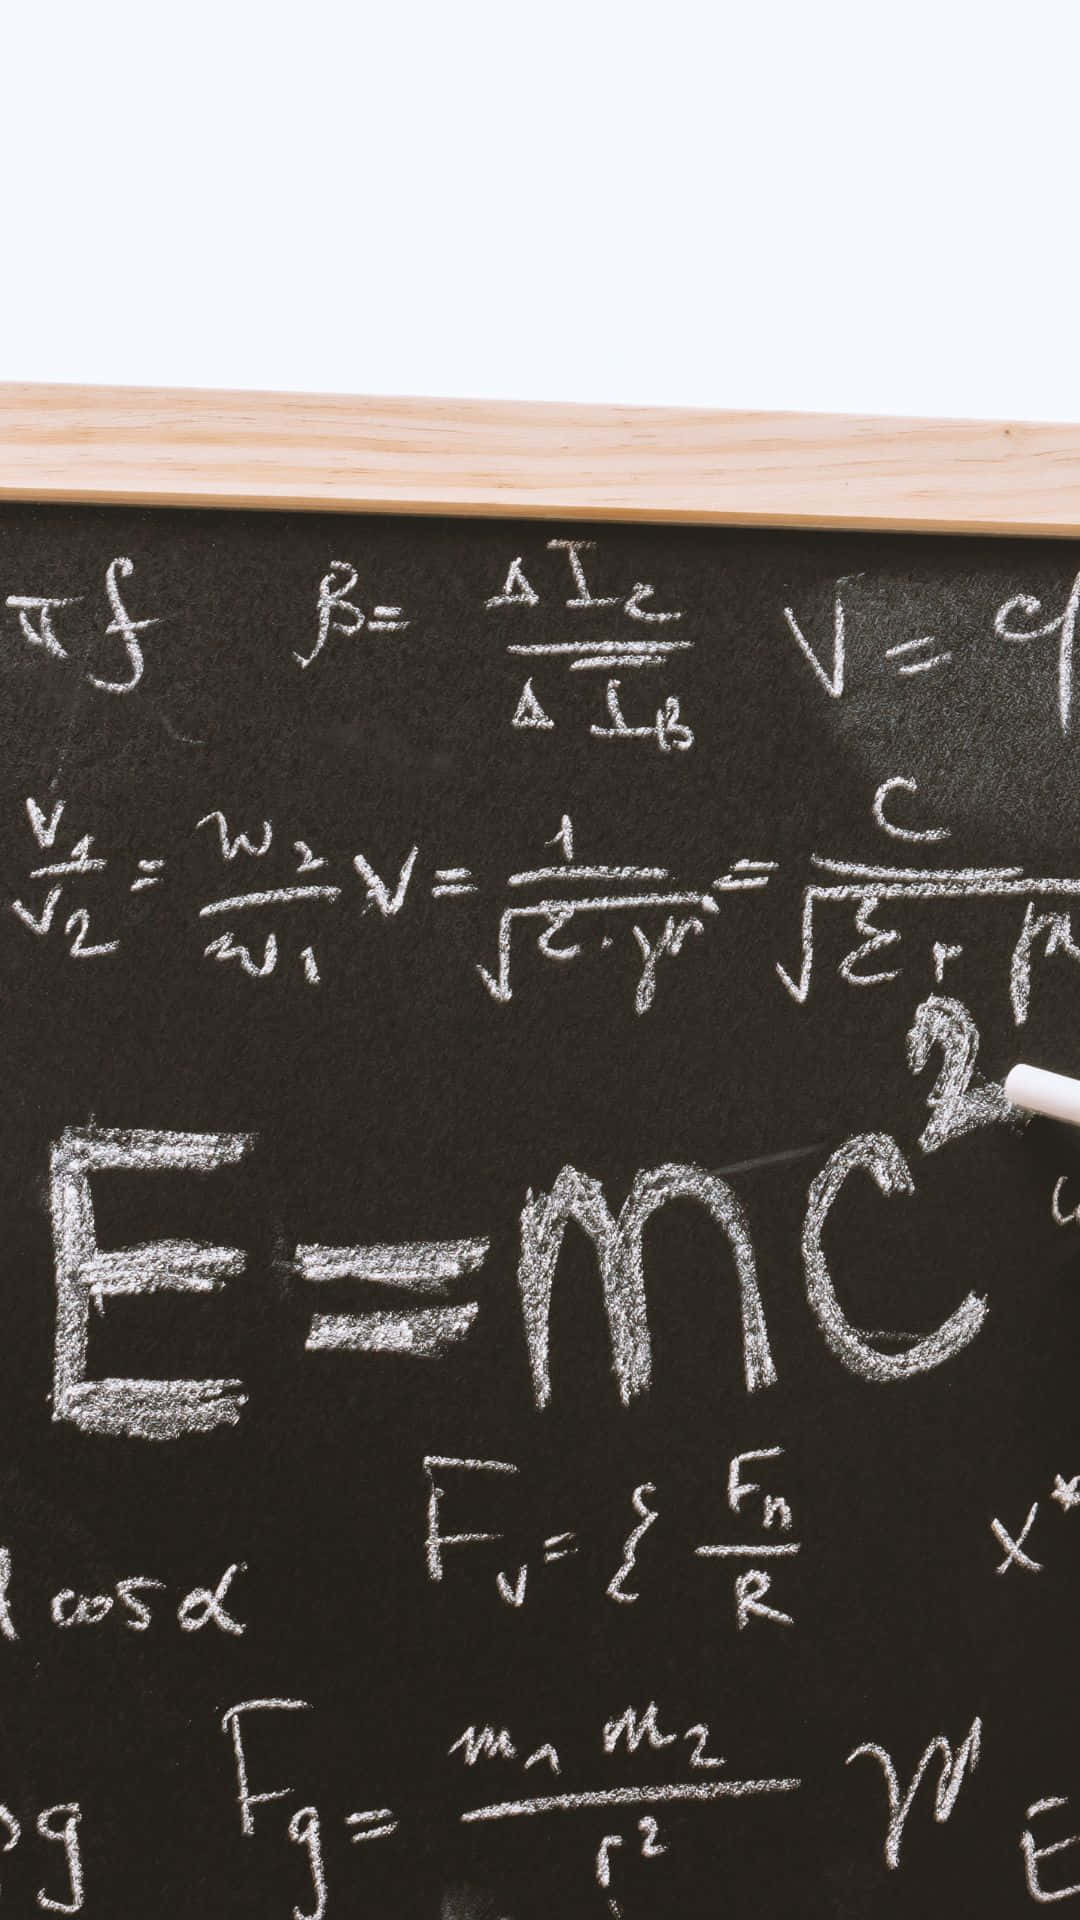 Download Detailed Physics Equations on a Whiteboard Wallpaper